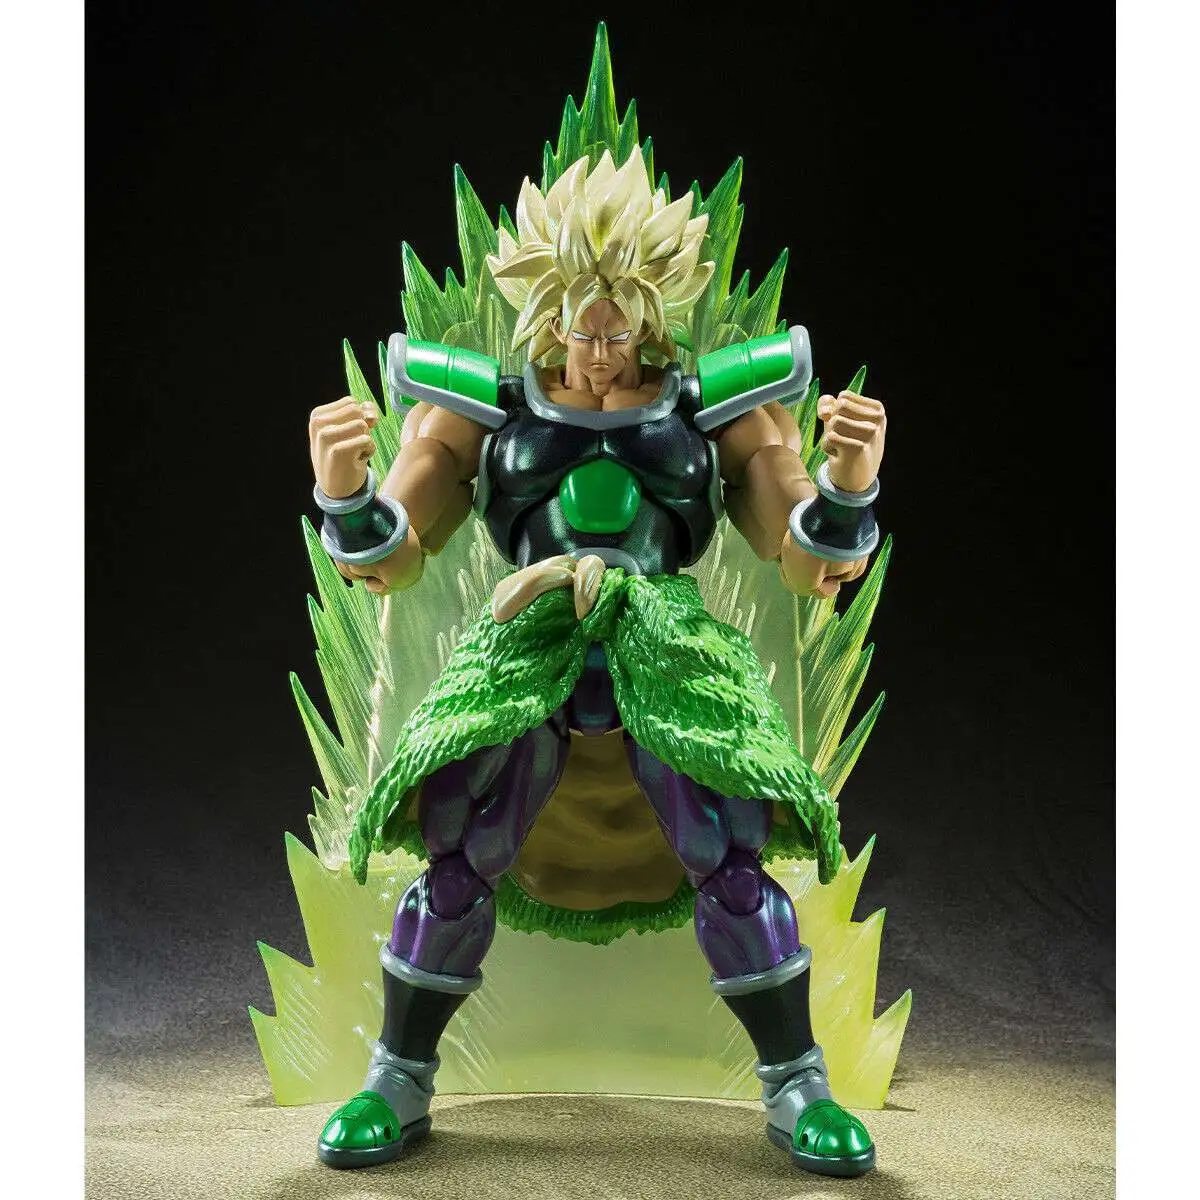 Dragon Ball Super: Broly Movie Goku Figure Coming Soon From S.H. Figuarts